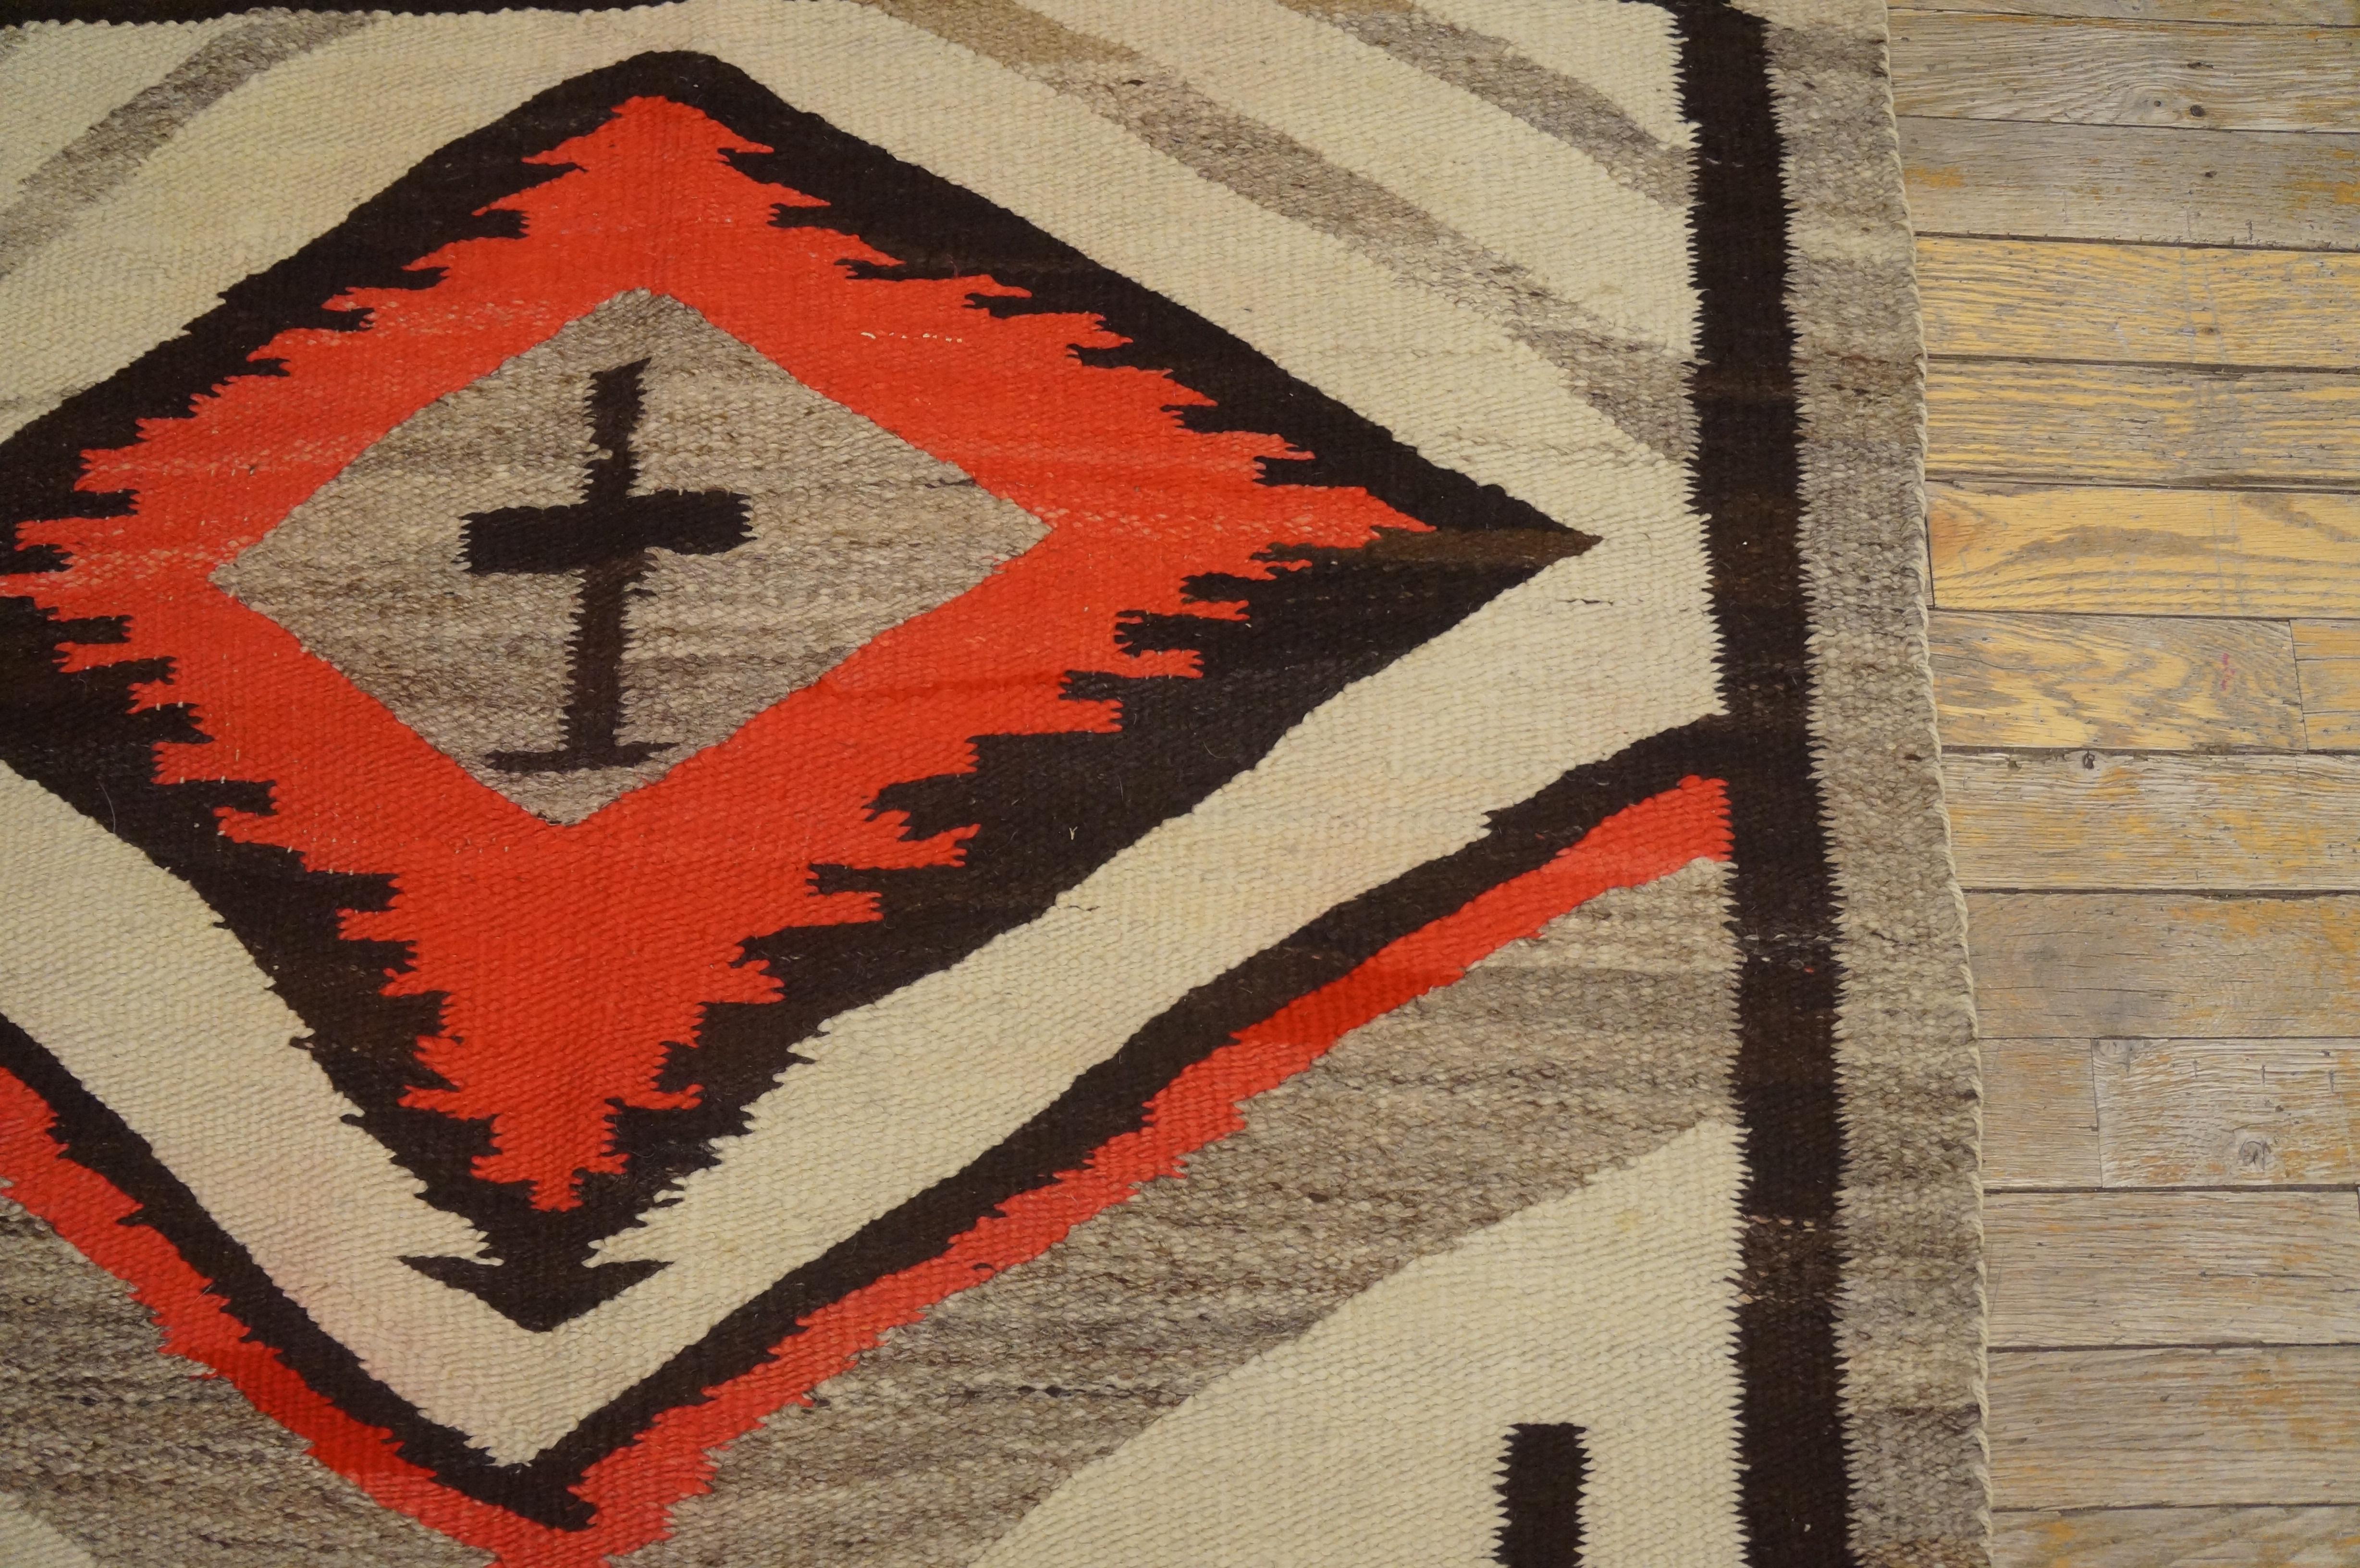 Hand-Woven Early 20th Century American Navajo Carpet ( 3'4